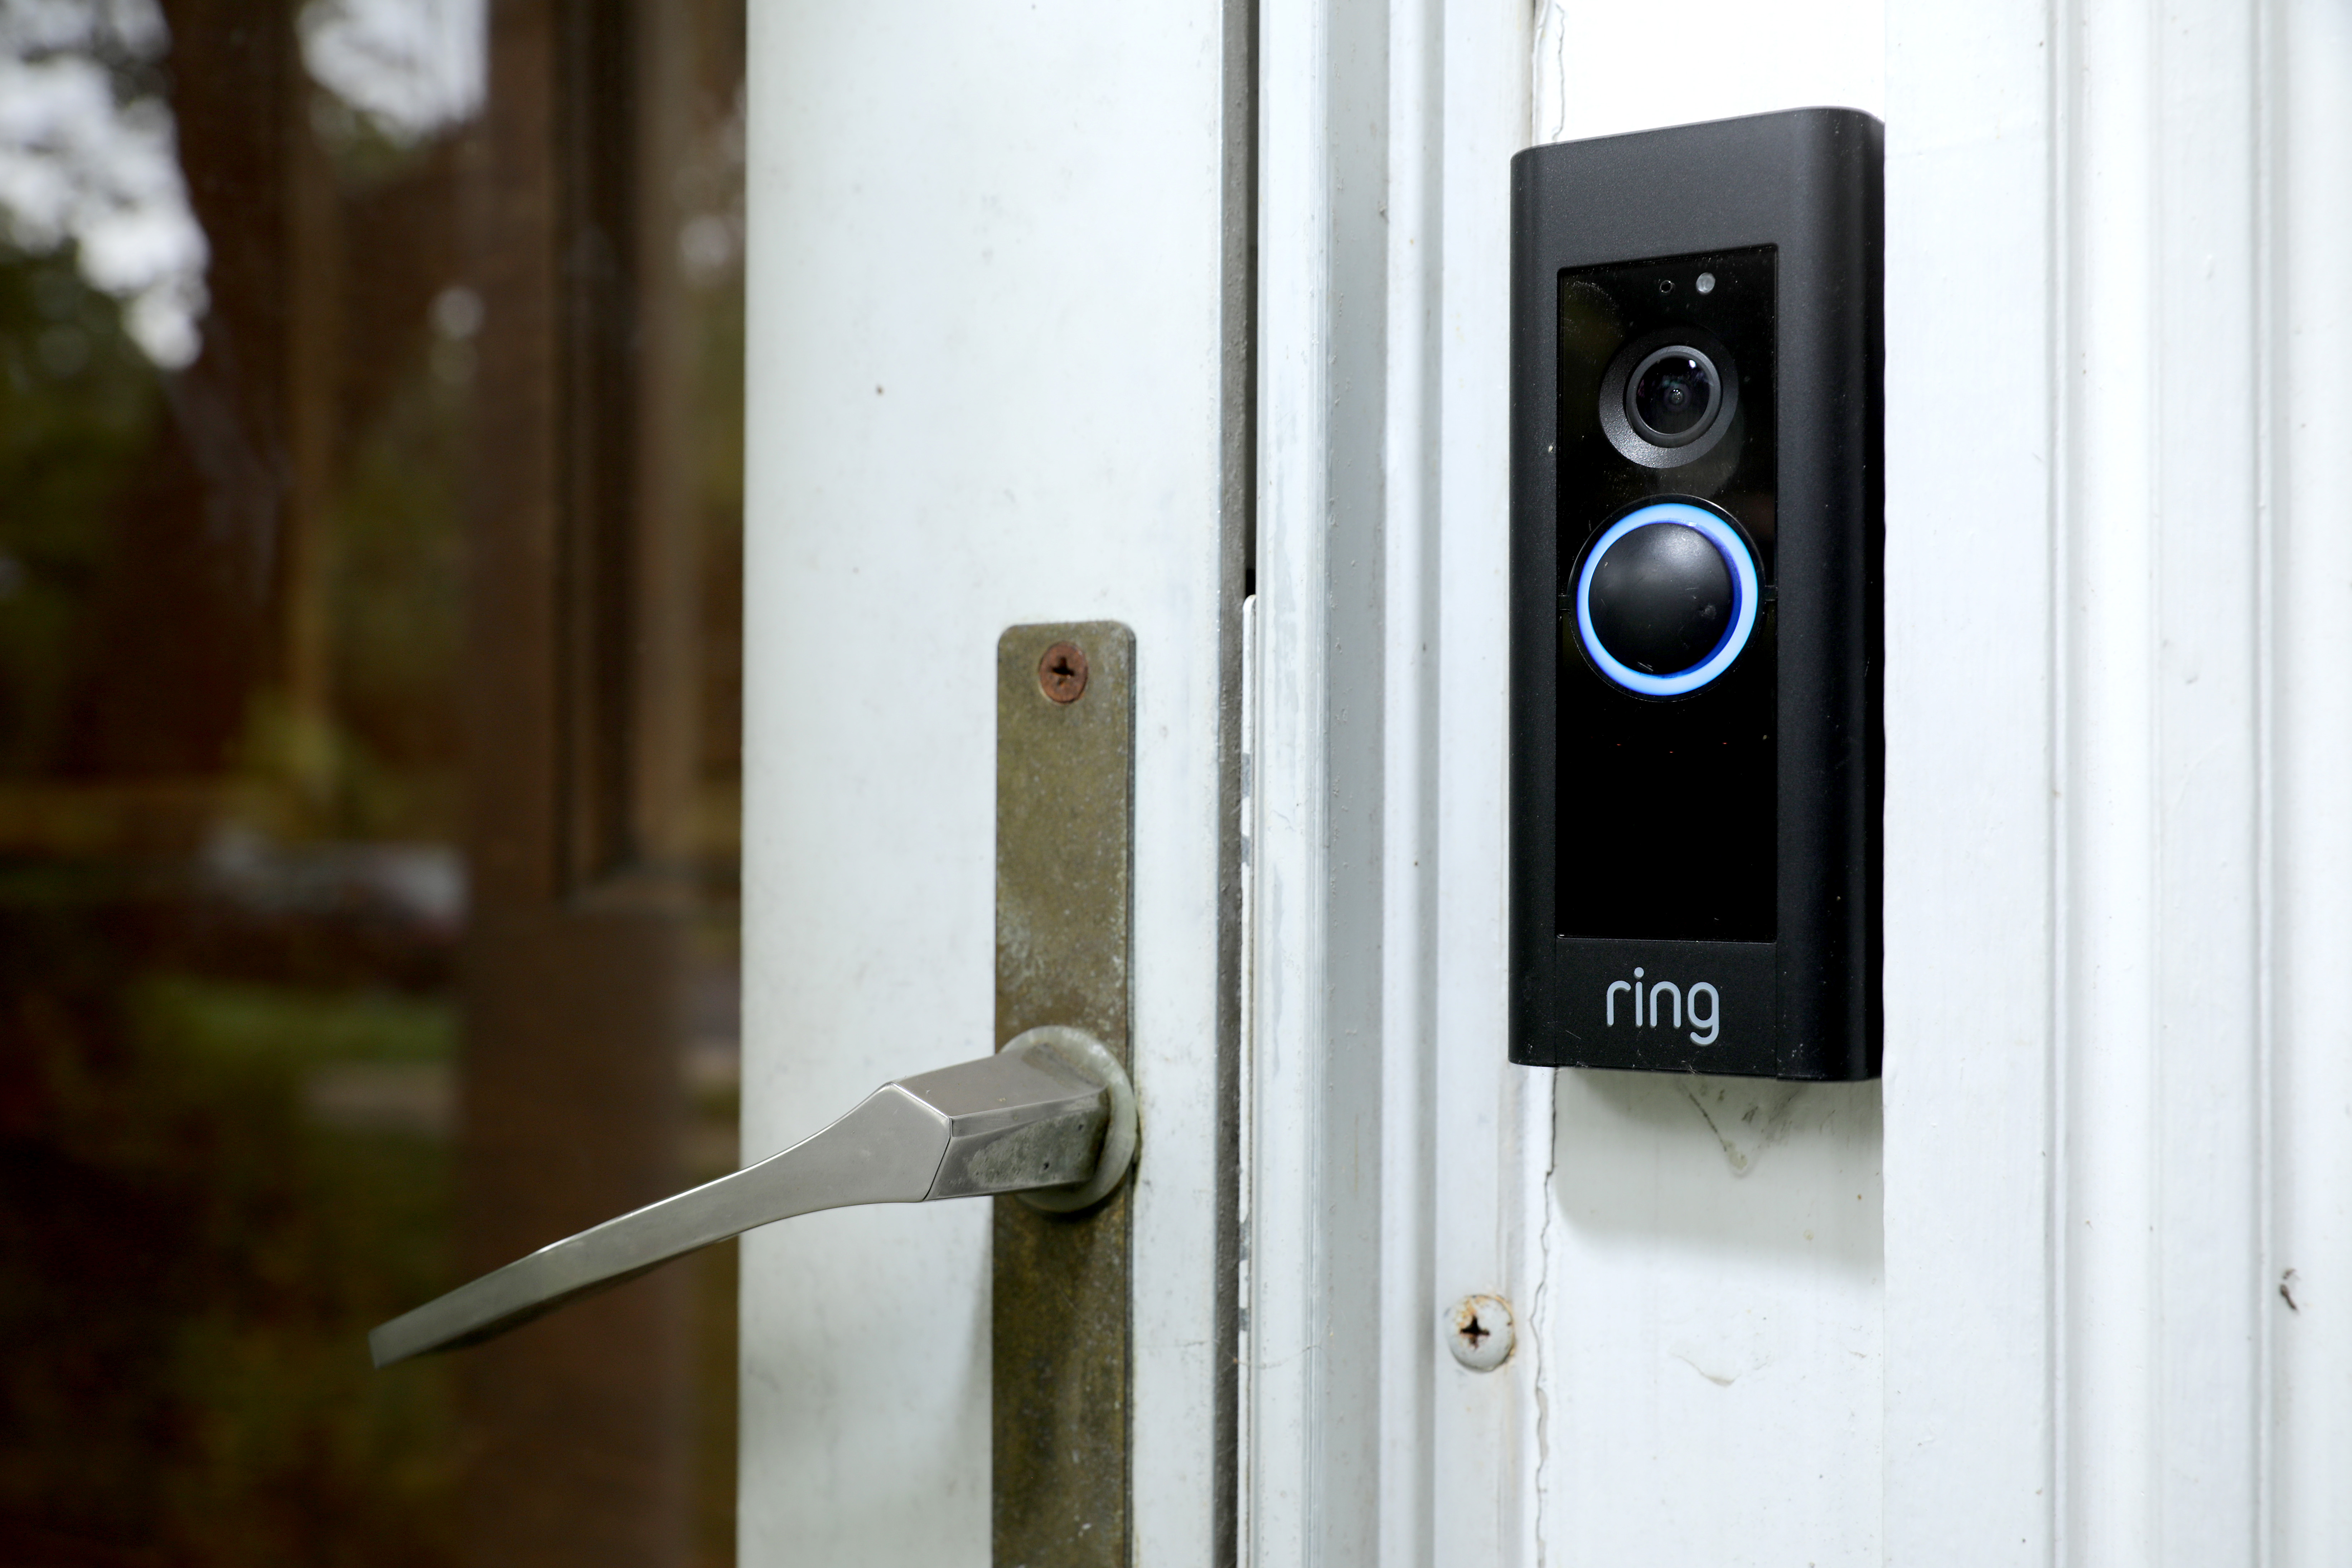 A doorbell device with a built-in camera made by home security company Ring is seen on August 28, 2019 in Silver Spring, Maryland. These devices allow users to see video footage of who is at their front door when the bell is pressed or when motion activates the camera. According to reports, Ring has made video-sharing partnerships with more than 400 police forces across the United States, granting them access to camera footage with the homeowners’ permission in what the company calls the nation’s 'new neighborhood watch.' (Photo by Chip Somodevilla/Getty Images)